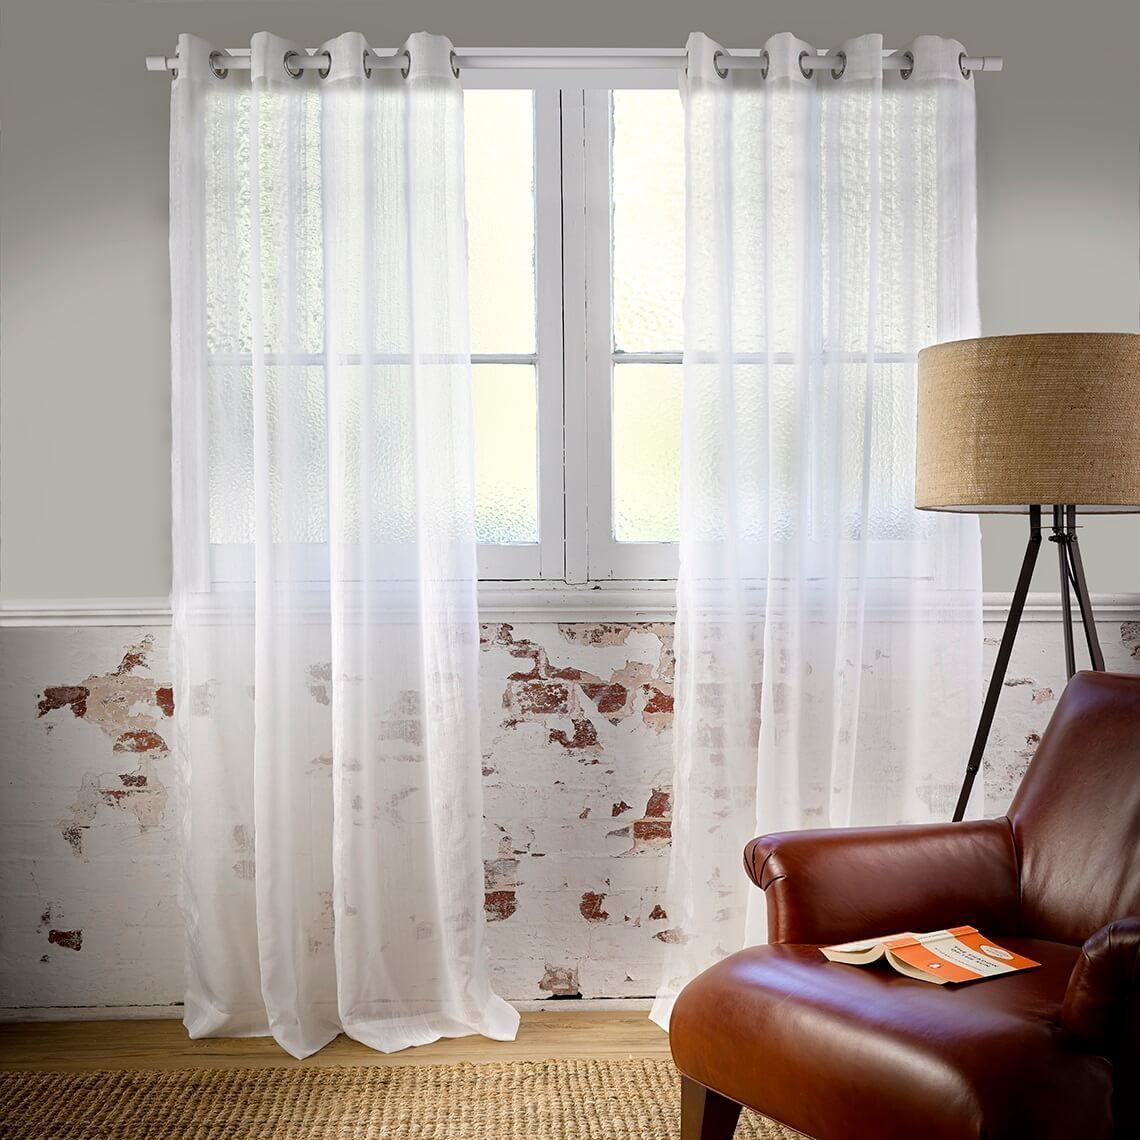 Houston 180x250cm Sheer Eyelet Curtain Freedom Furniture And Inside Sheer Eyelet Curtains (View 12 of 15)